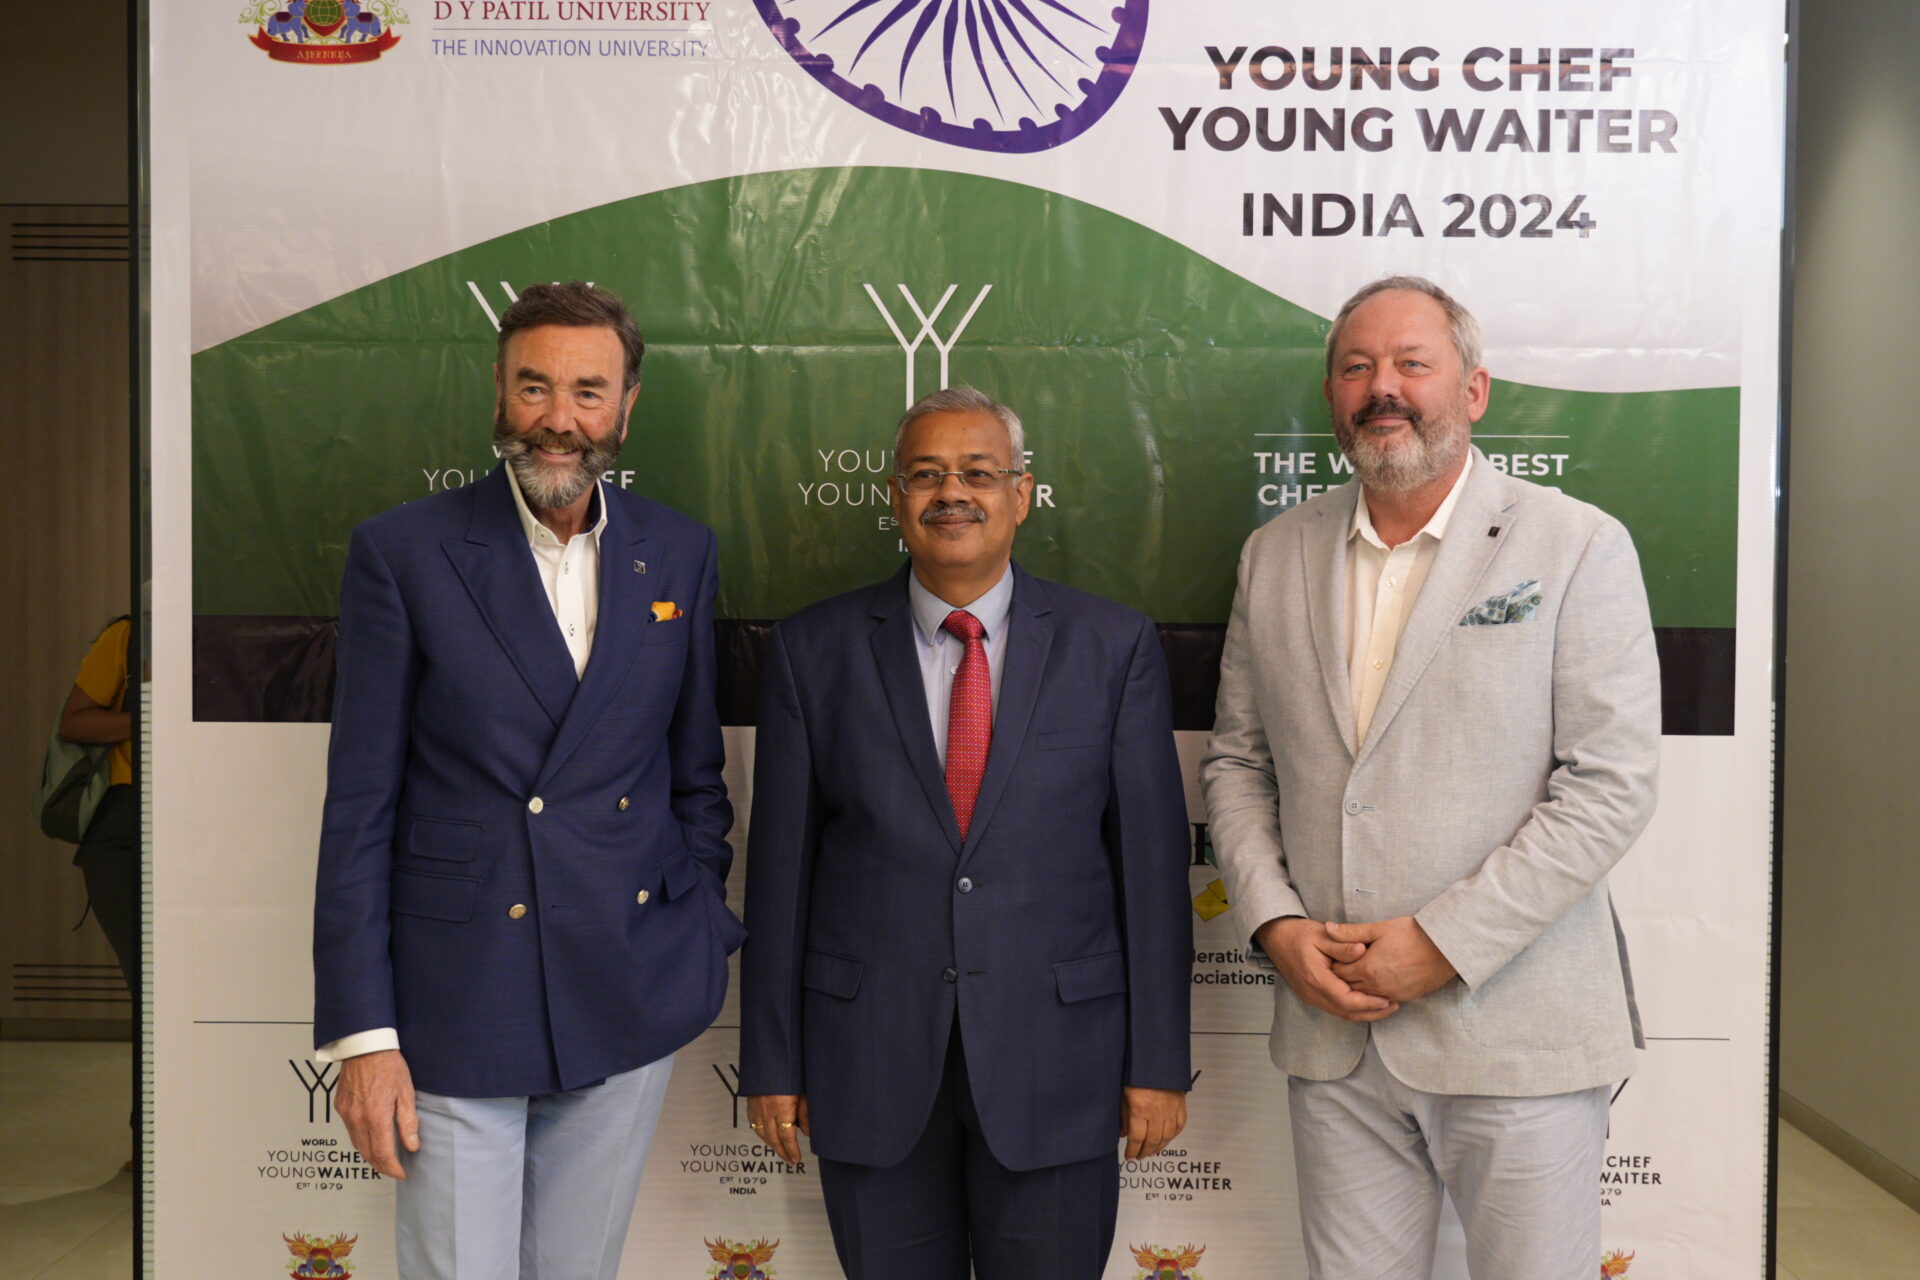 Ajeenkya DY Patil University to host India’s First Young Chef and Waiter Contest 2024